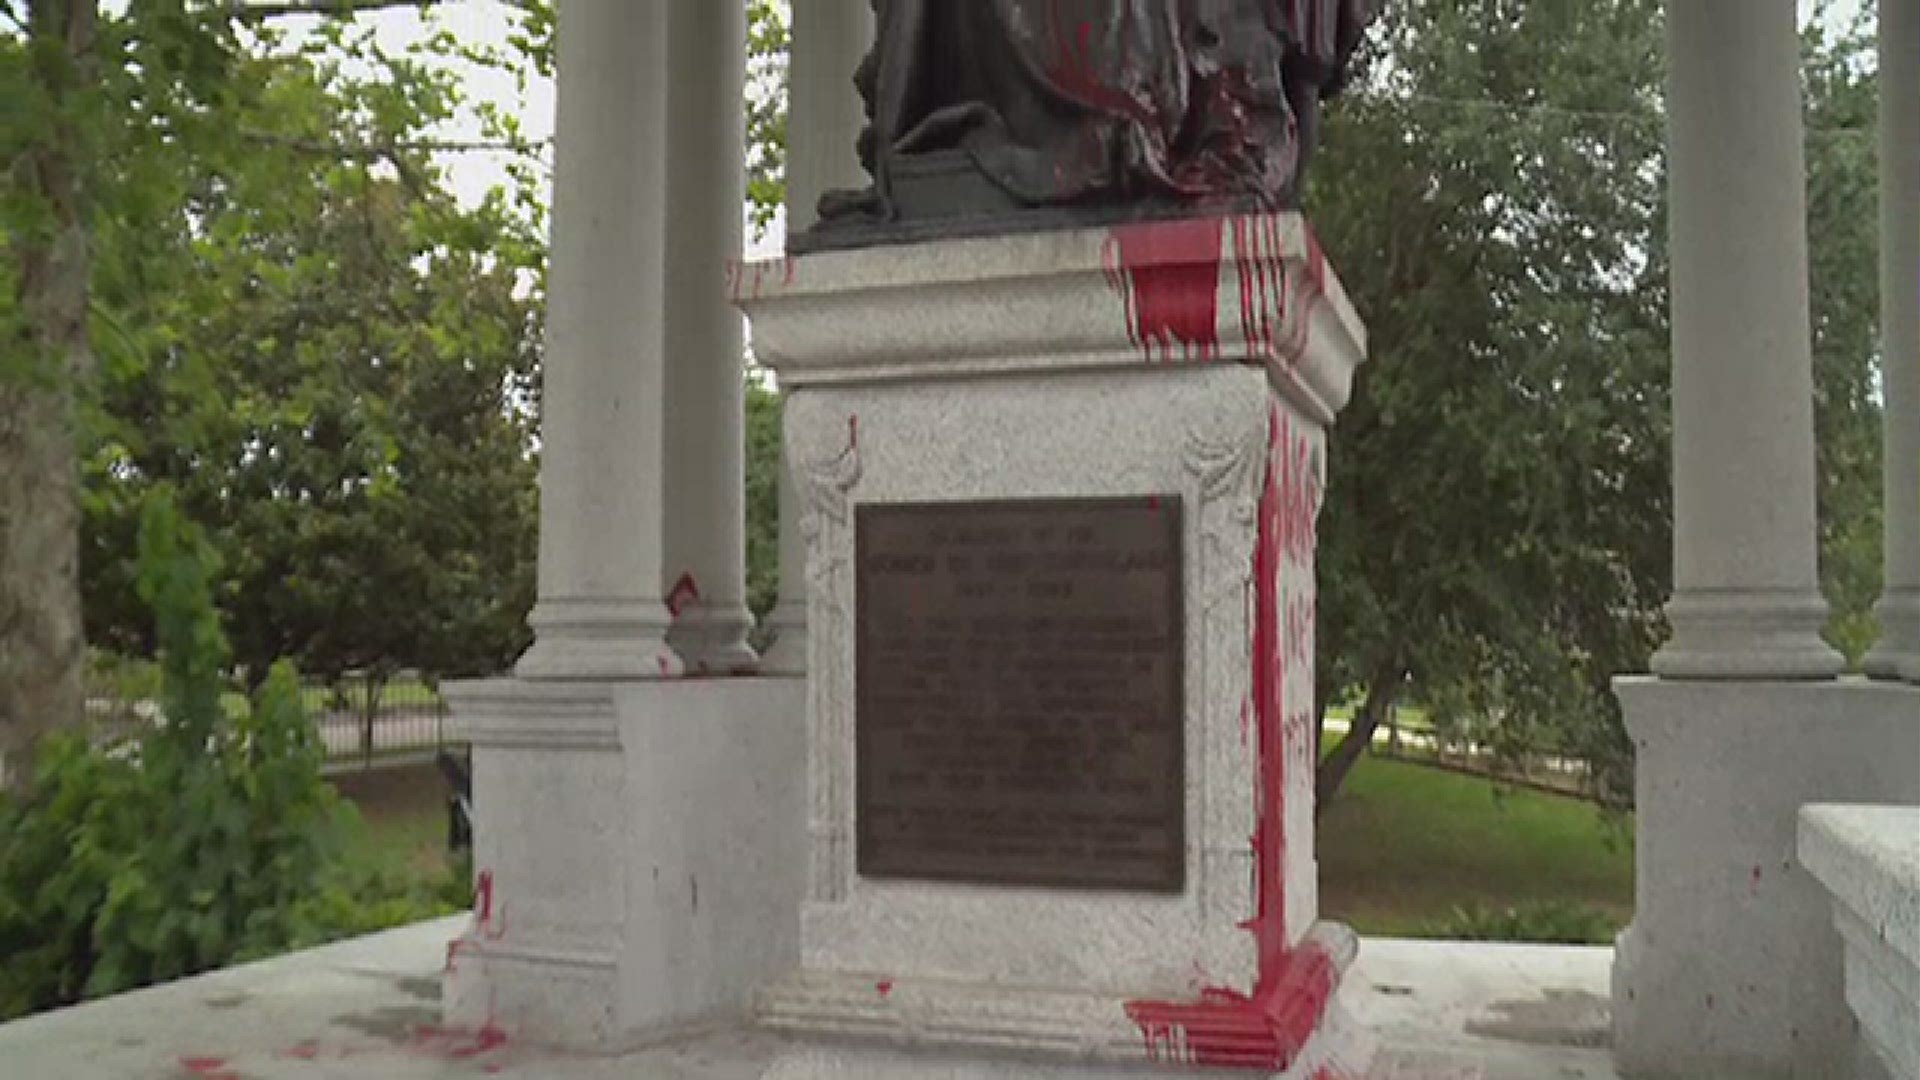 The 'Women of the Southland' statue is one of dozens of Confederate War monuments that has been vandalized or removed in recent days during national protests